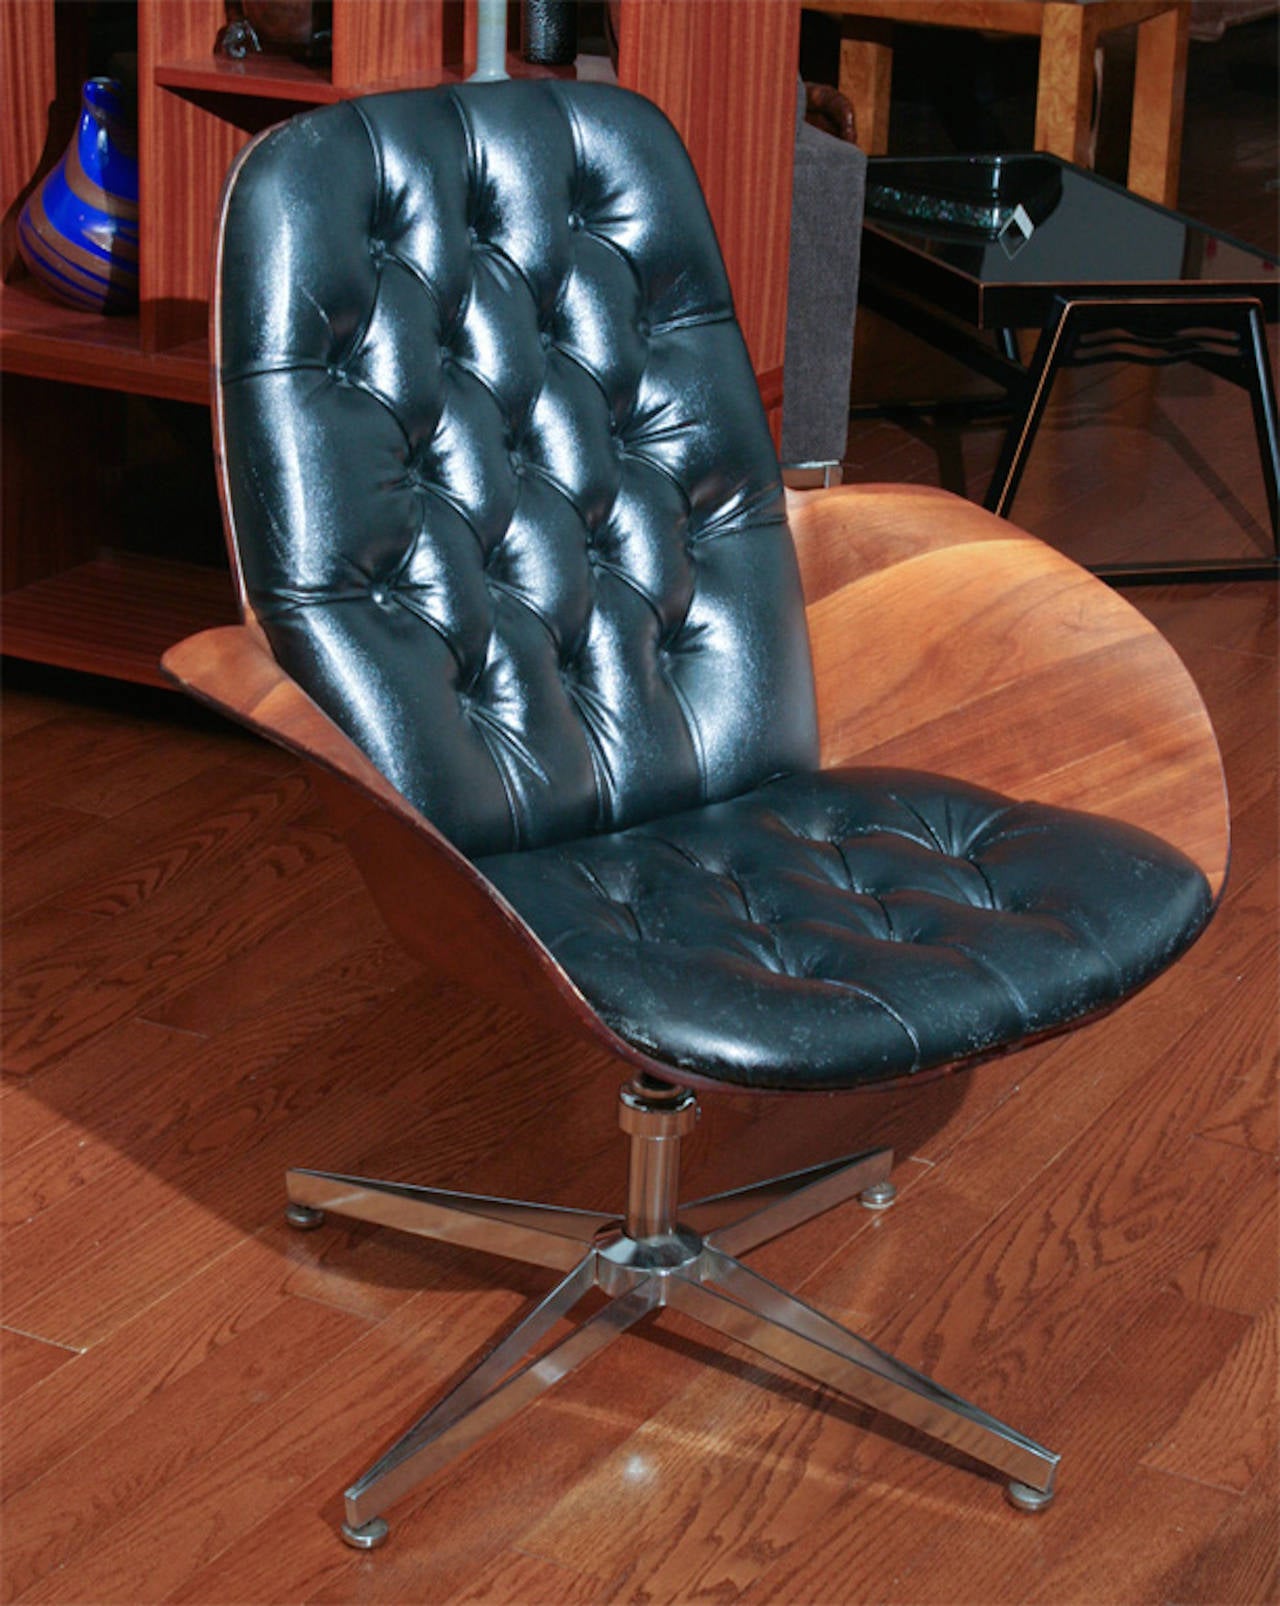 Chair by George Mulhauser for Plycraft.  Wood and faux black leather.